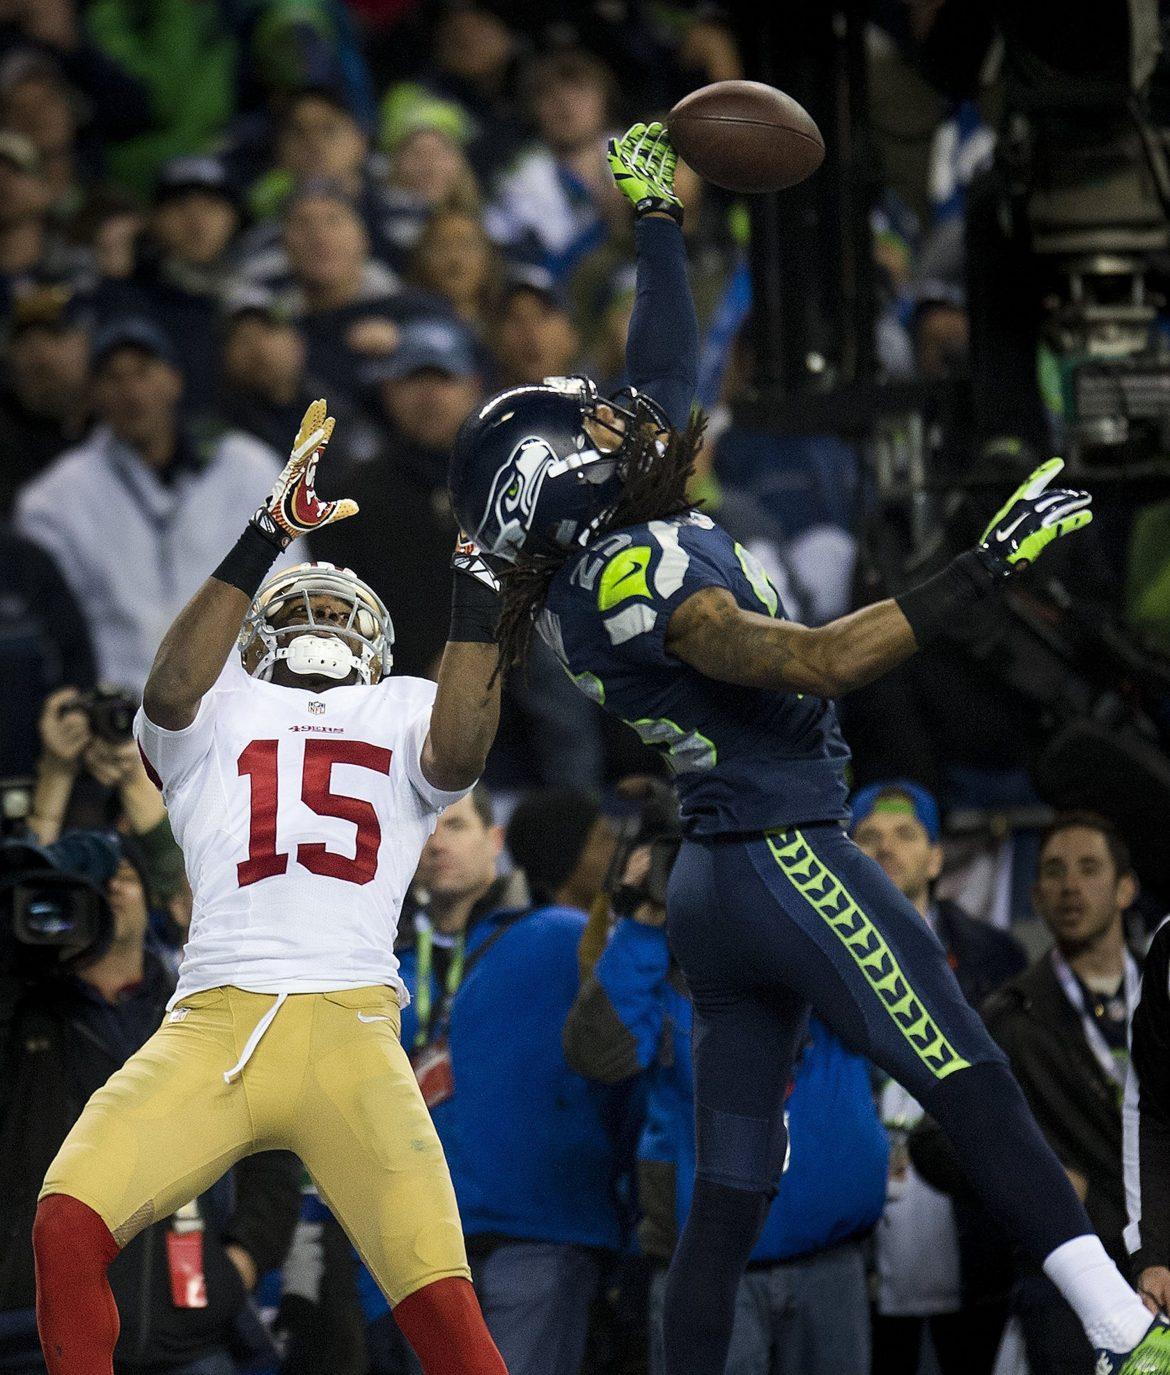 The+Seattle+Seahawks+and+San+Francisco+49ers+are+still+the+class+of+the+NFC%2C+but+both+have+questions+to+face+in+2014.